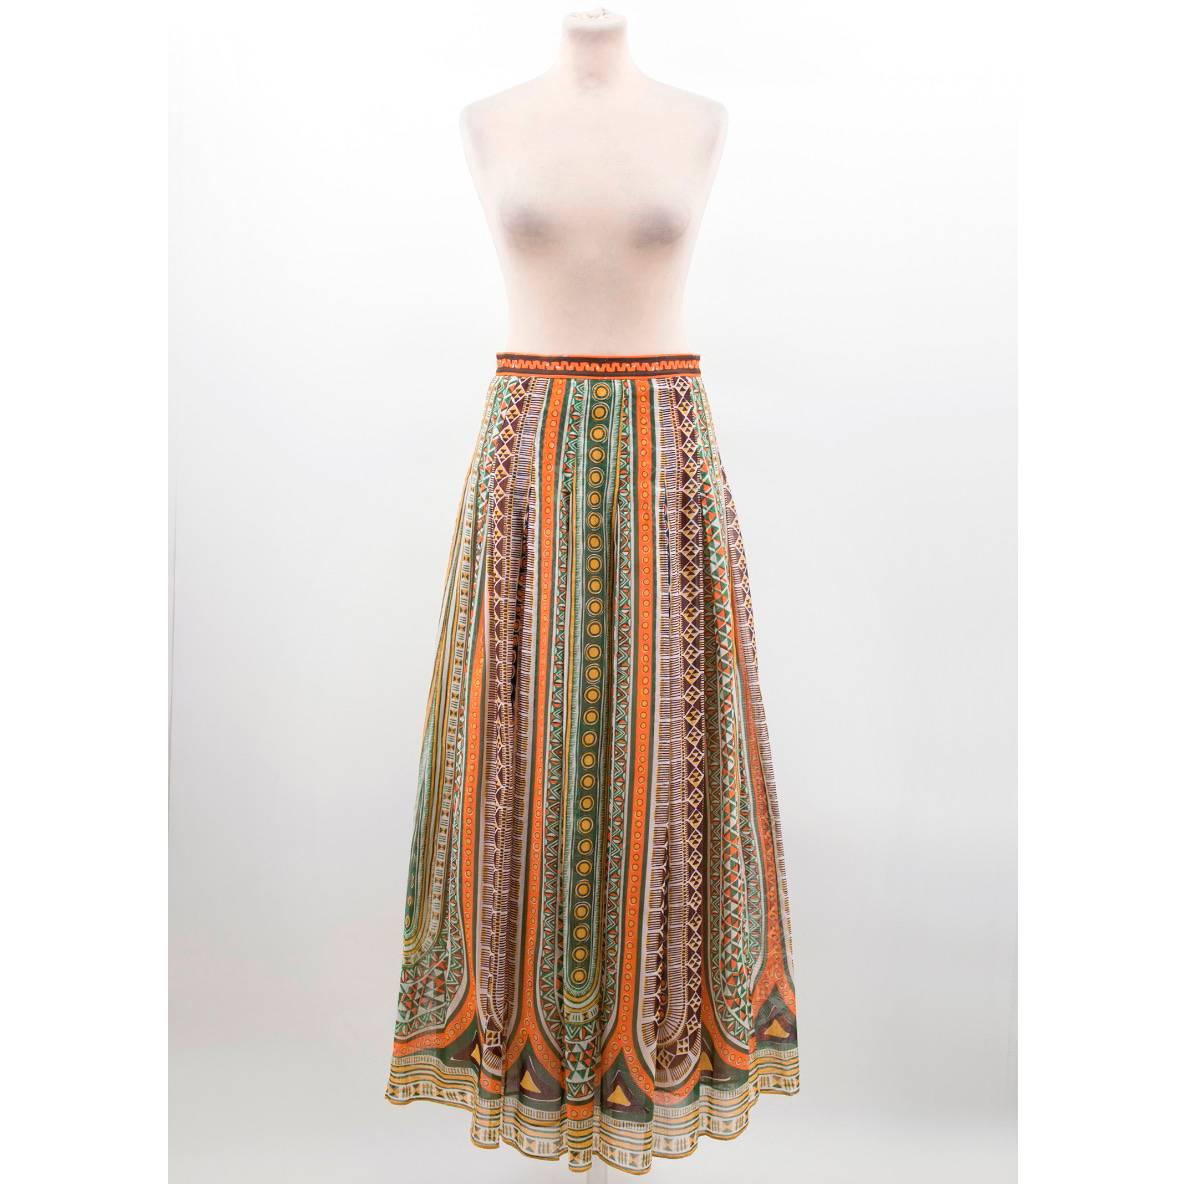 Valentino maxi tribal print skirt in a full, flared style with a multicoloured all-over print in a fitted high-waist style.

Size: US 4
Measurements: Approx. Waist: 36cm Length: 101cm
Condition: 10/10

* Please note, these items are pre-owned and